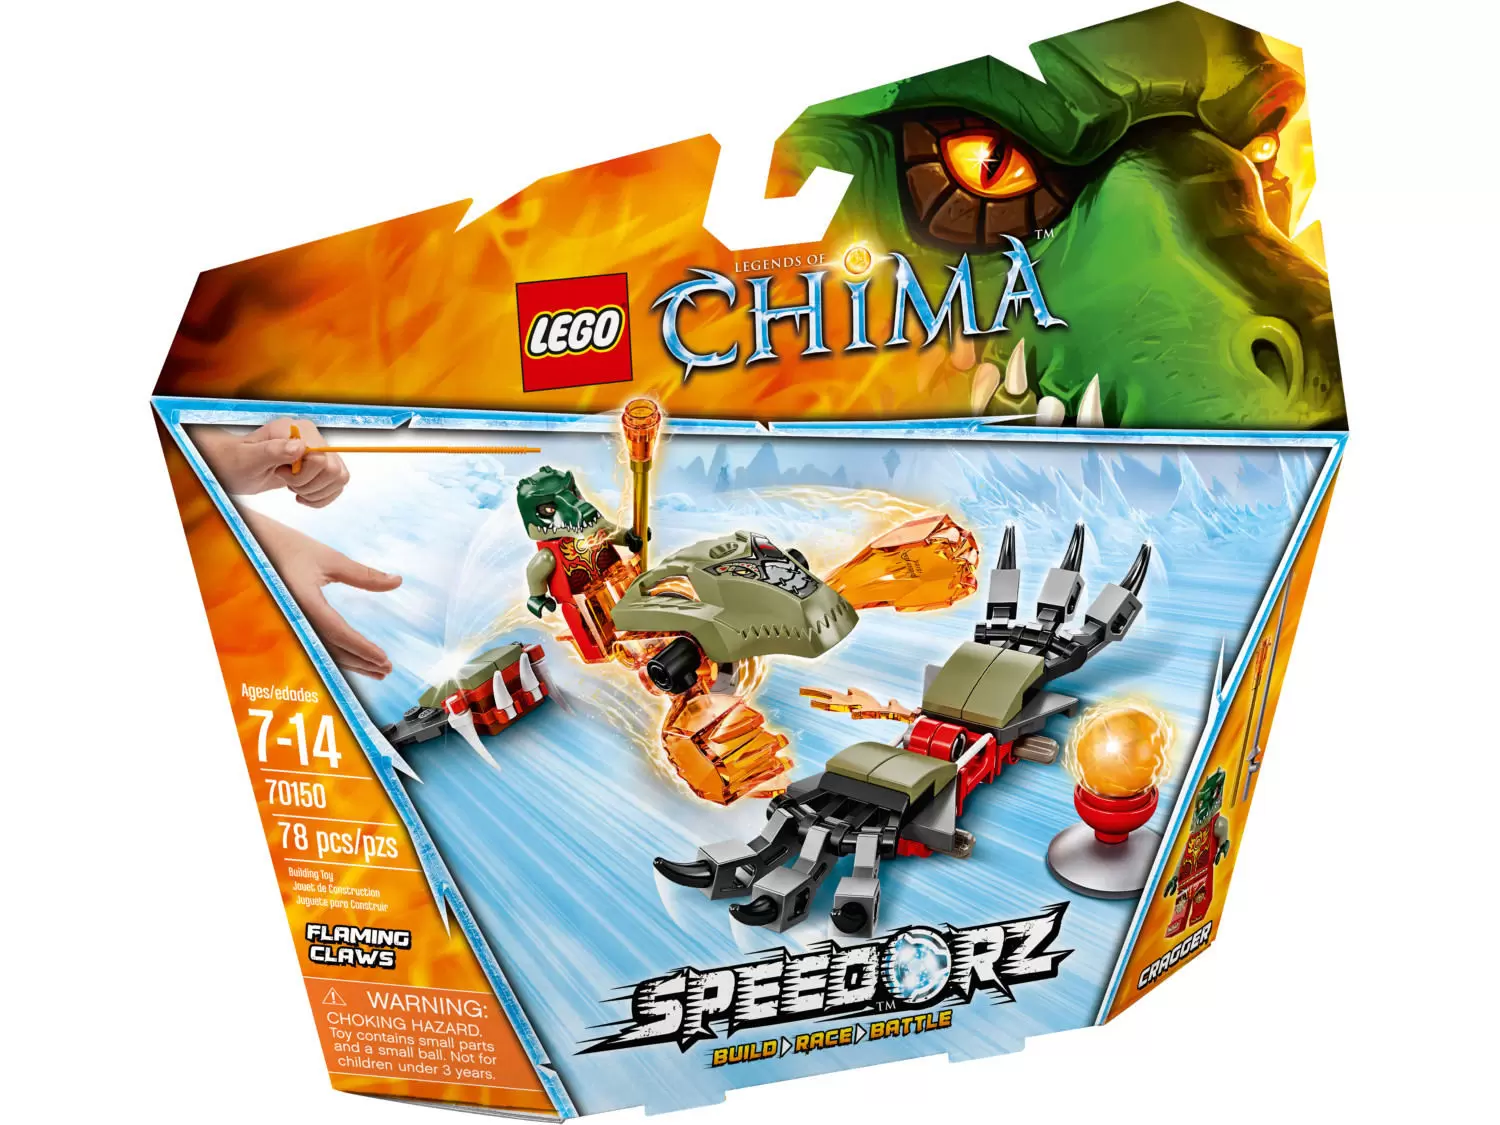 LEGO Legends of Chima - Flaming Claws